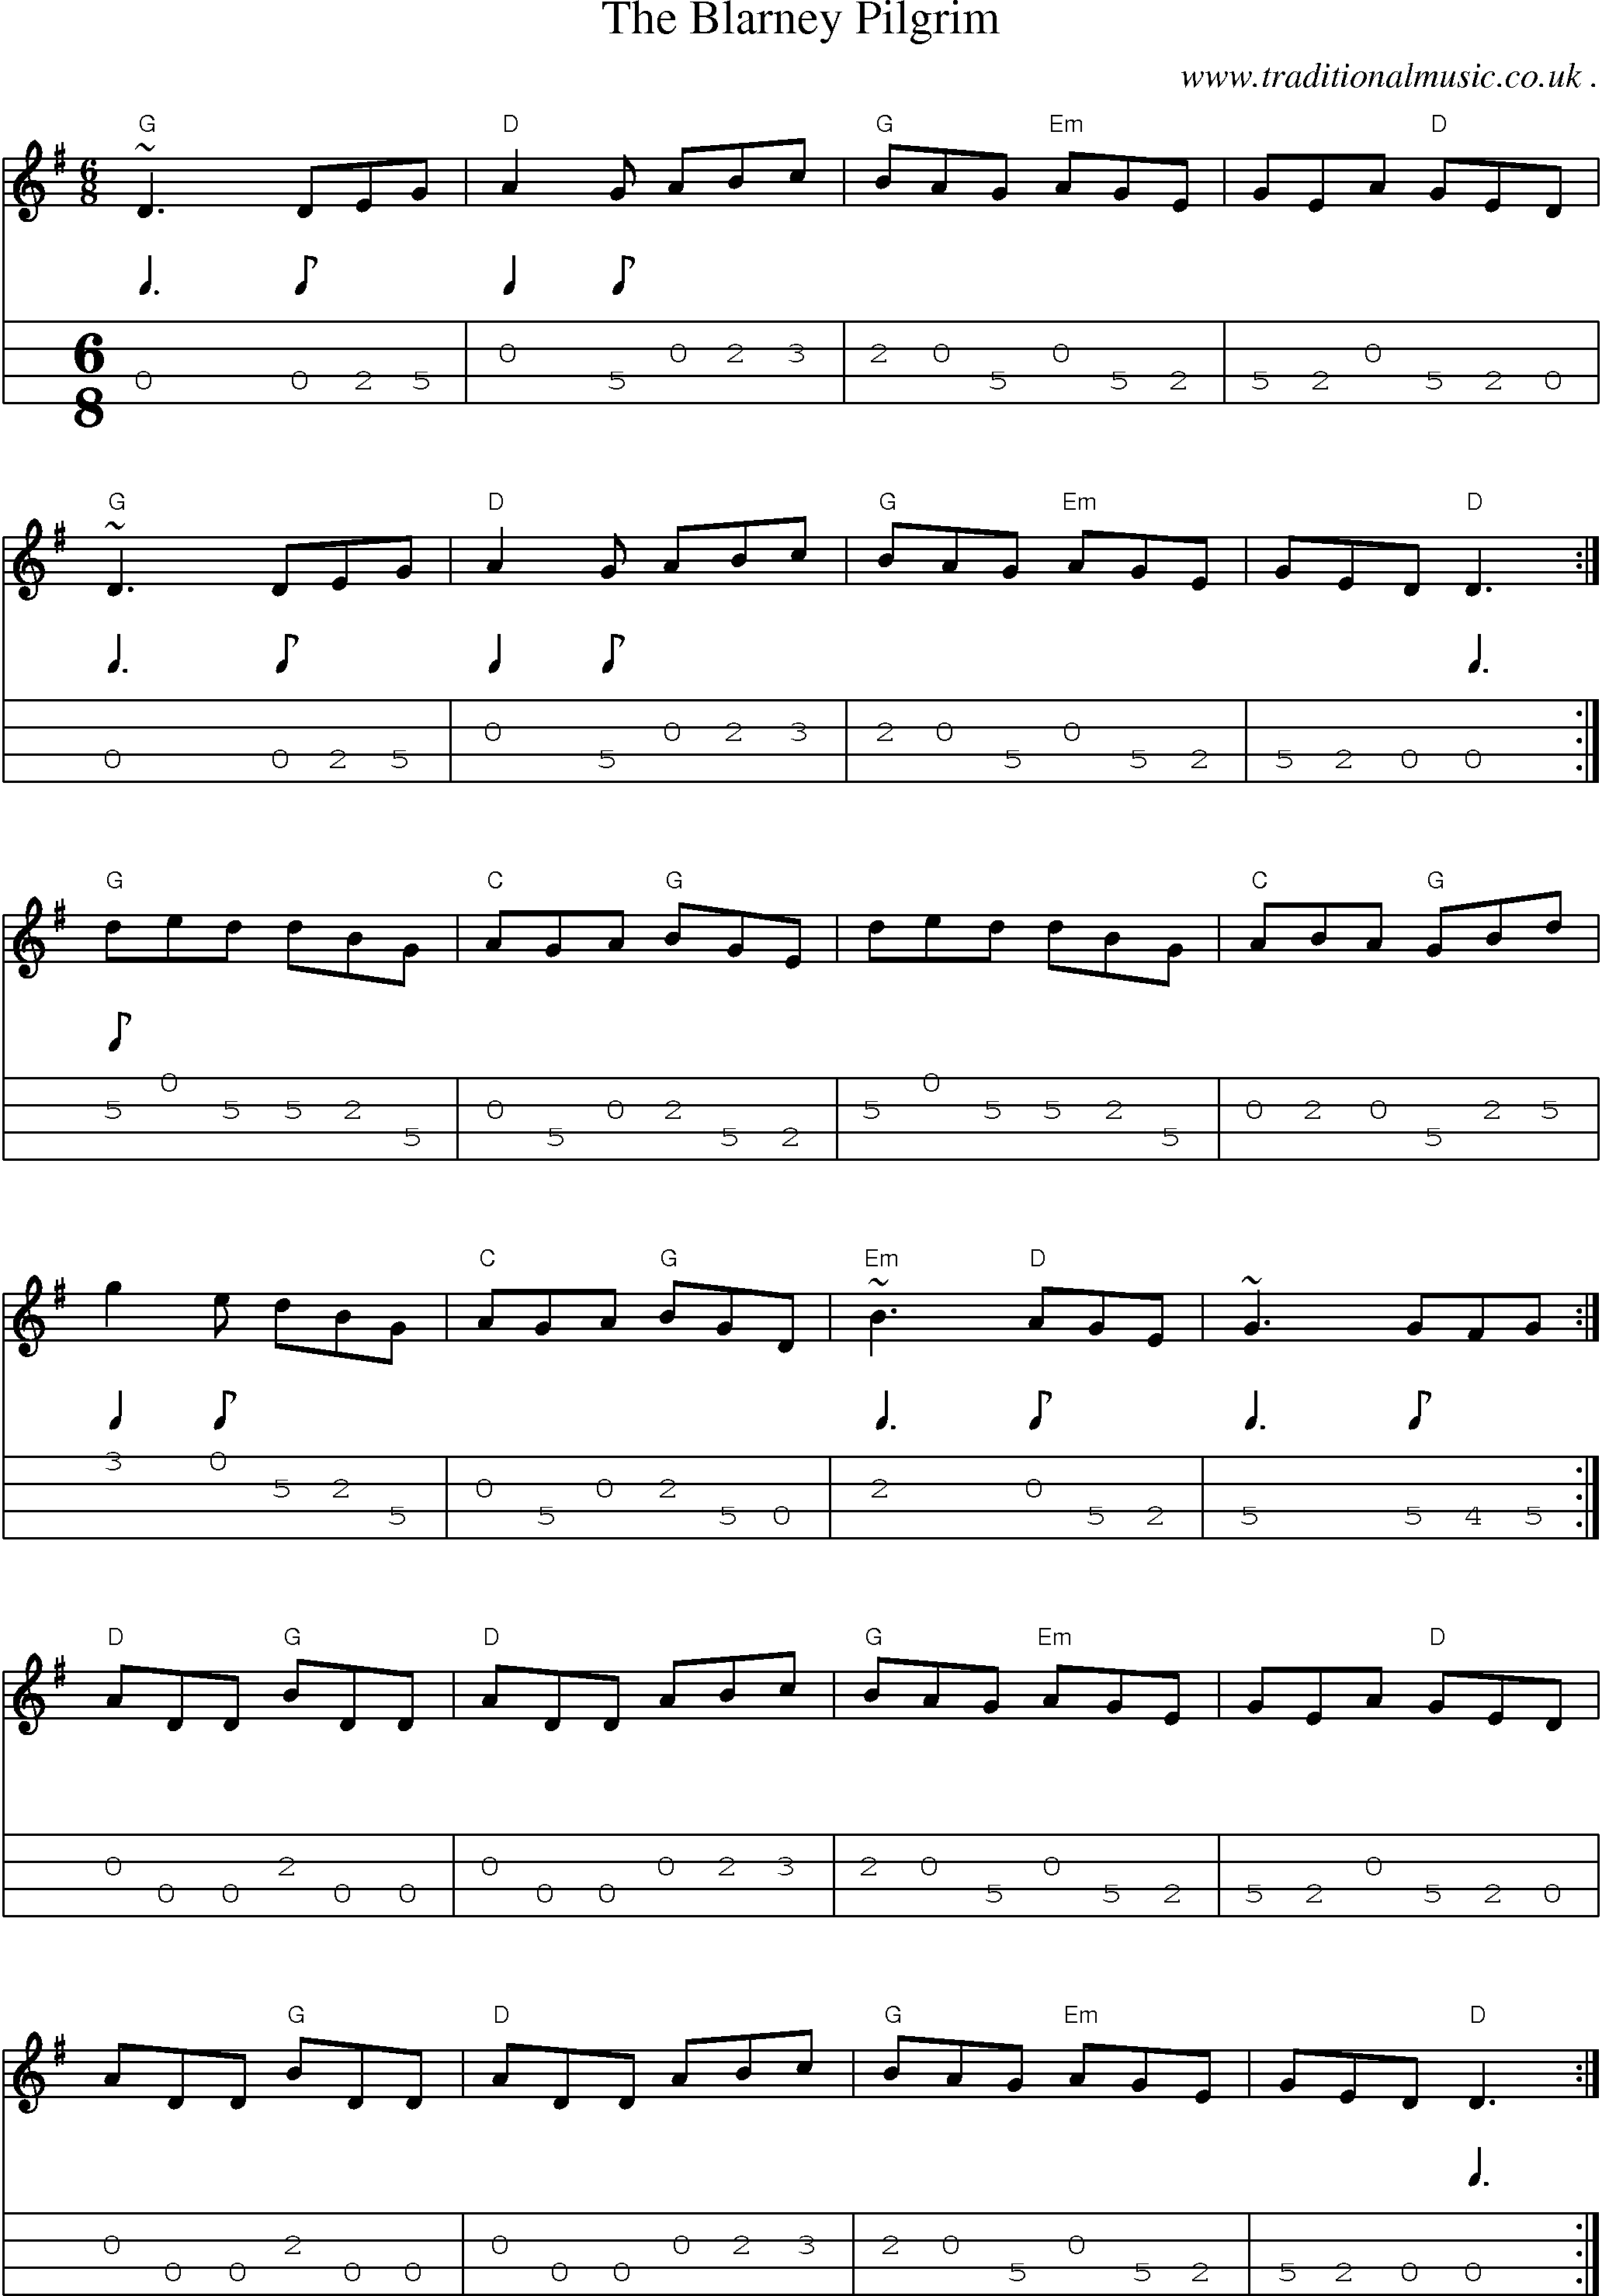 Music Score and Guitar Tabs for The Blarney Pilgrim